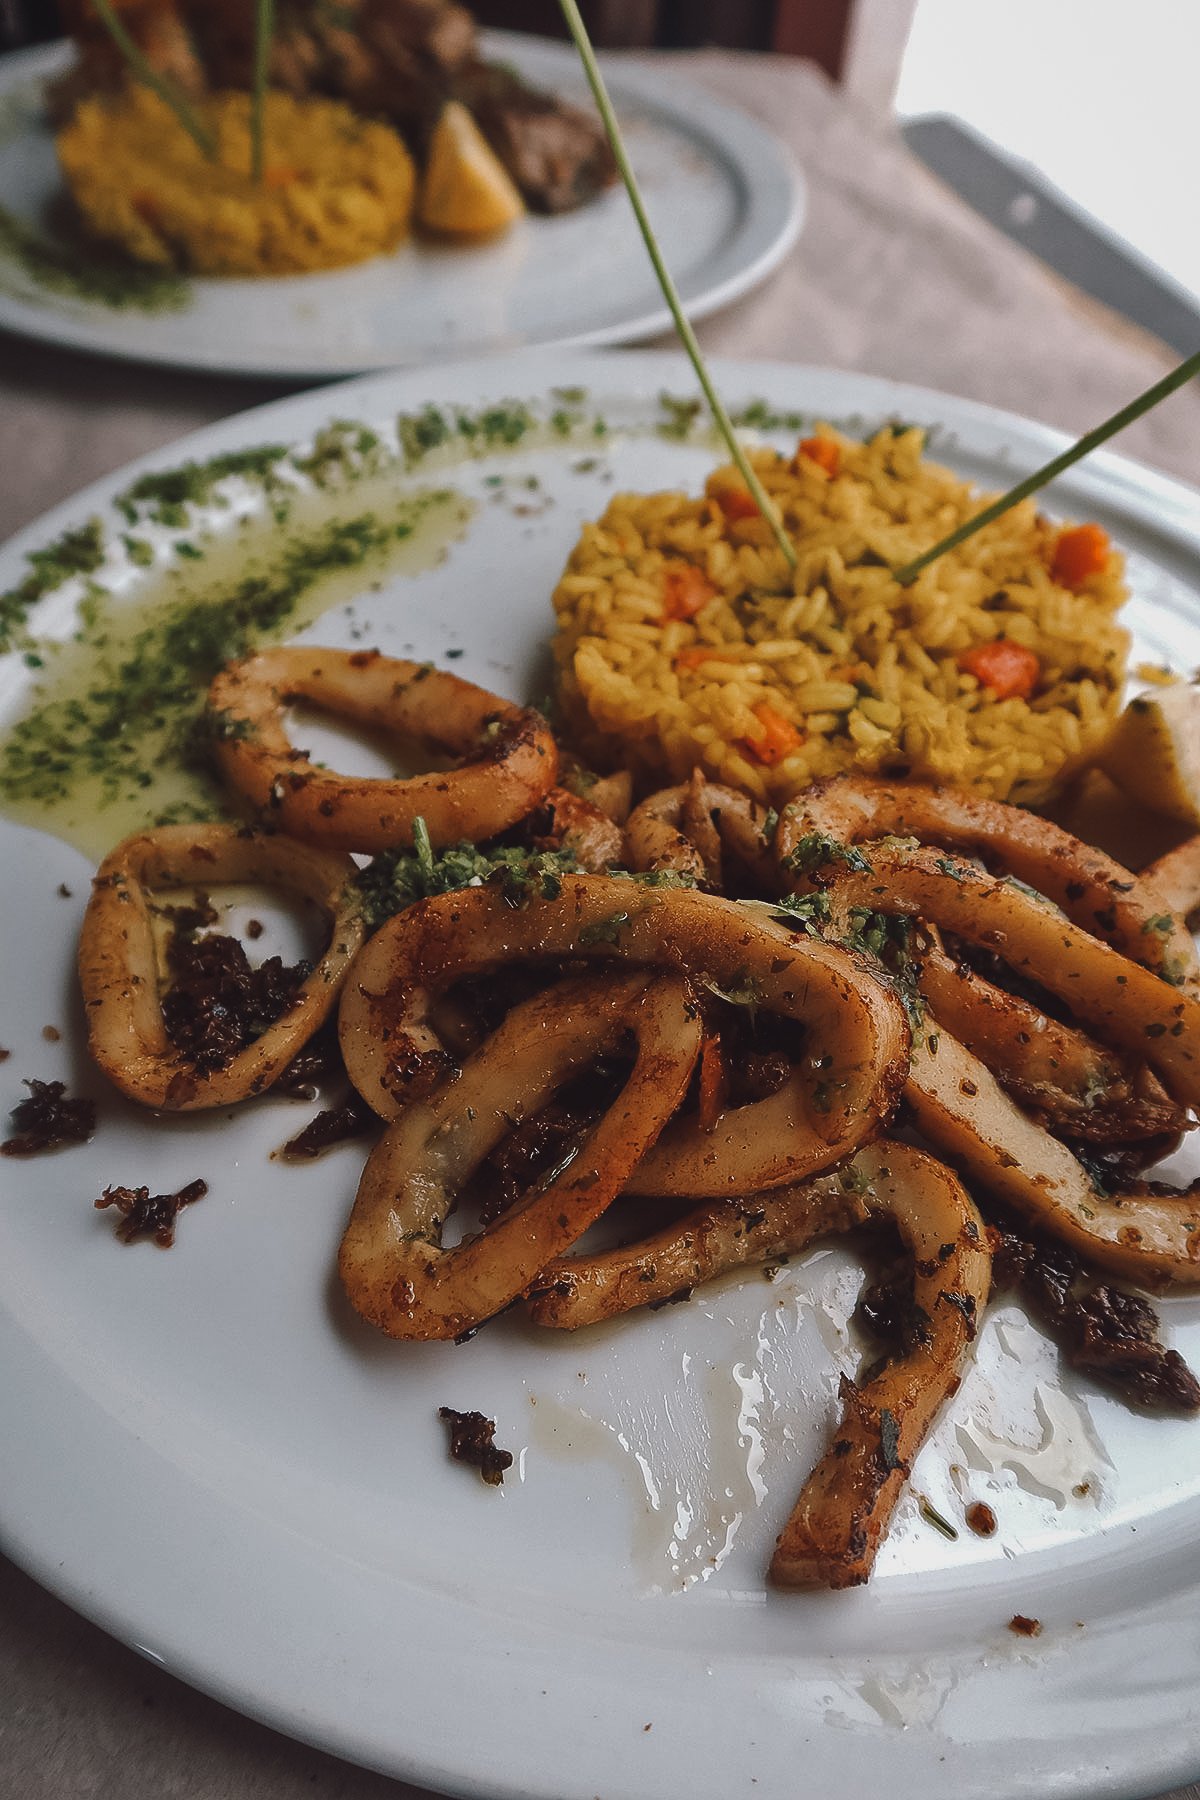 Grilled squid at a restaurant in Tangier